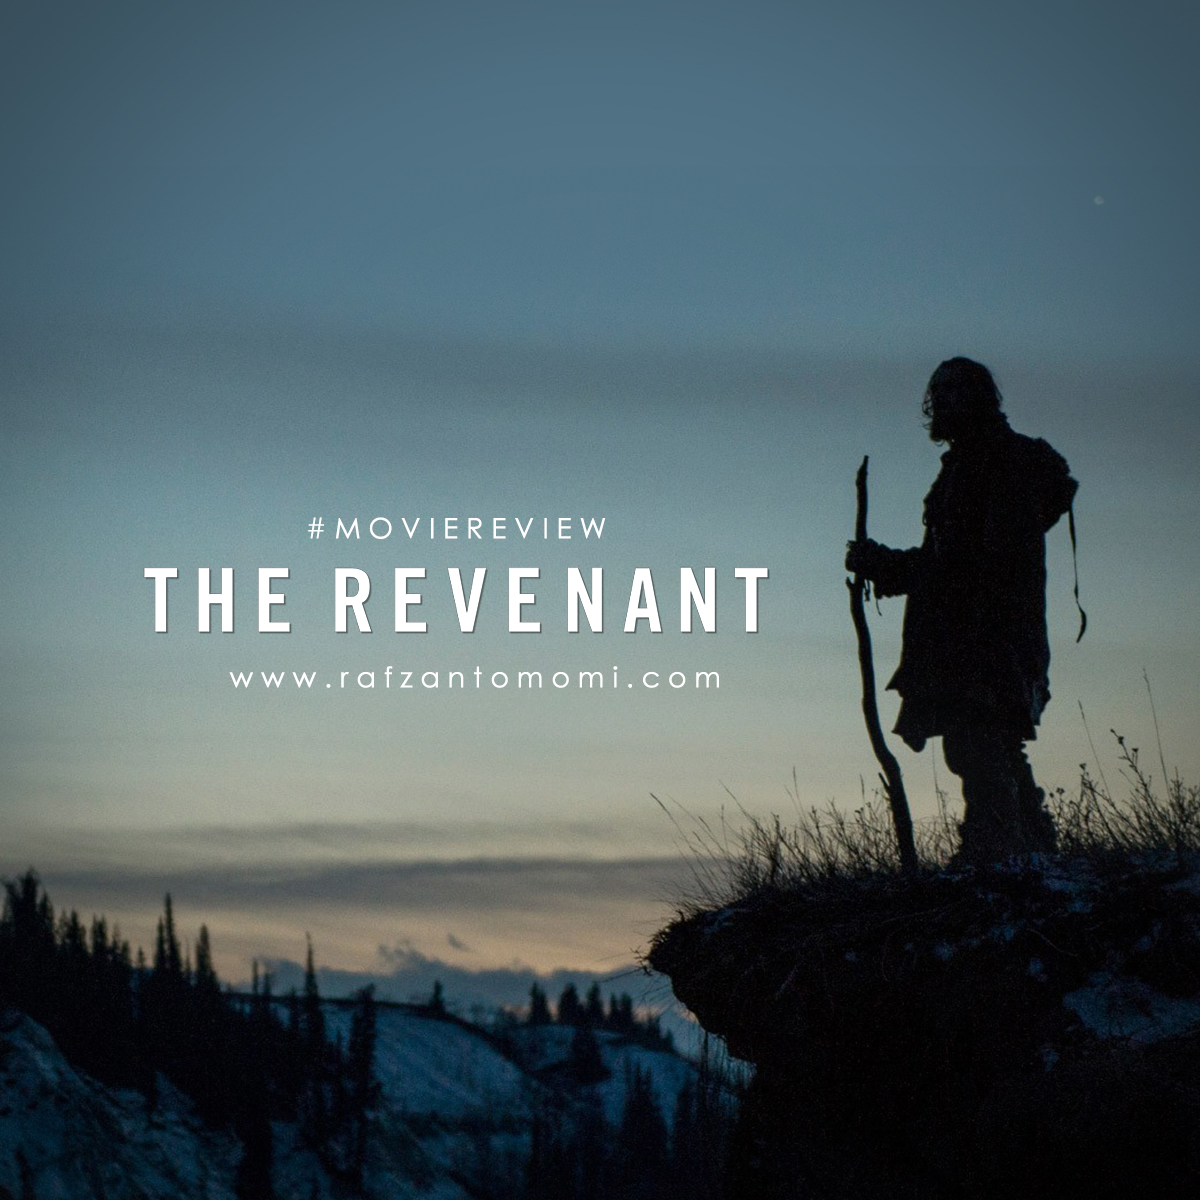 Movie Review - The Revenant